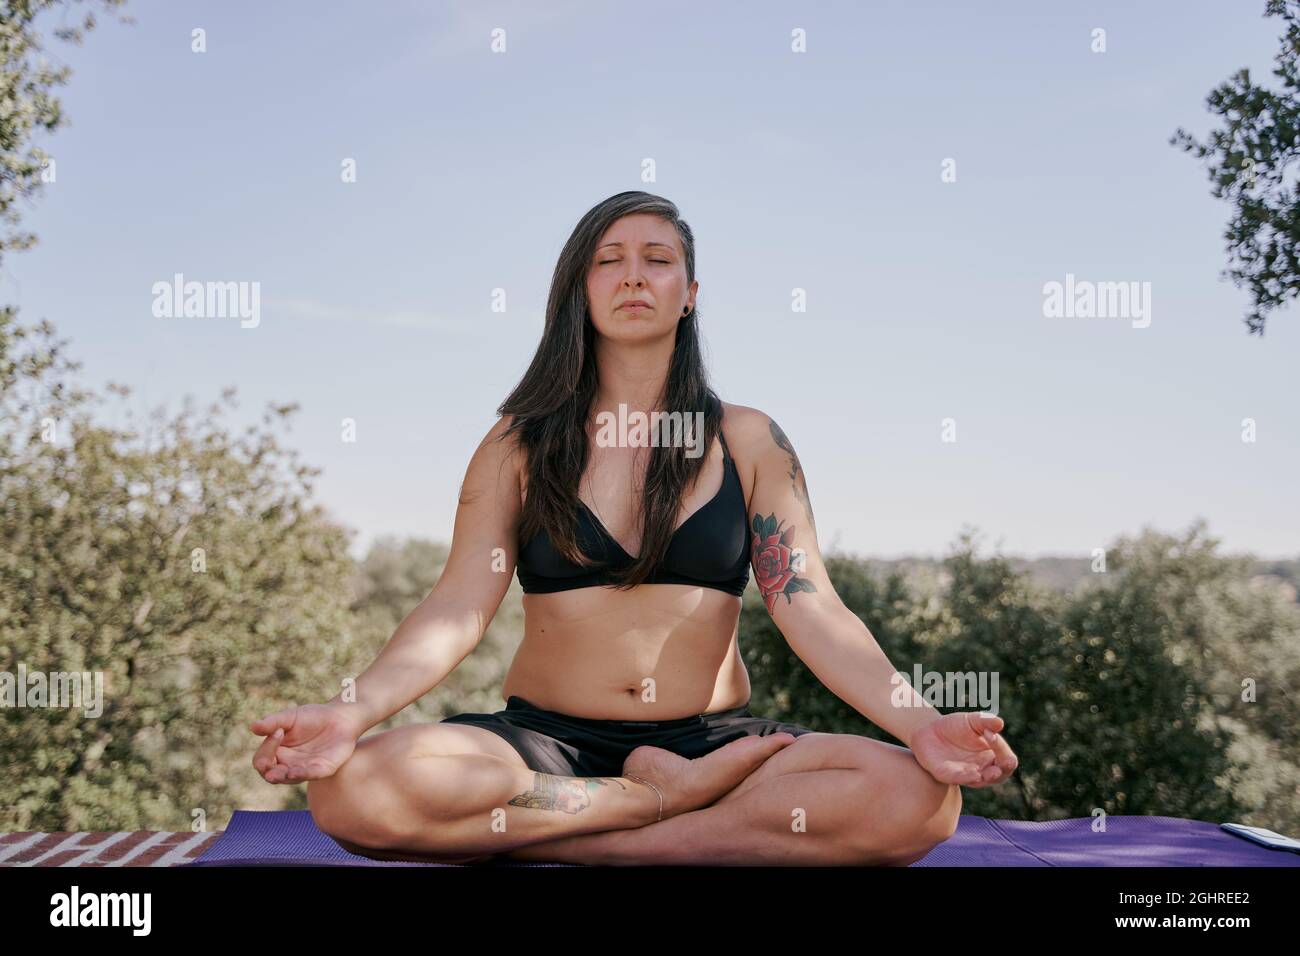 Woman meditating in yoga posture outdoors. Concept of meditation and leisure activities. Stock Photo